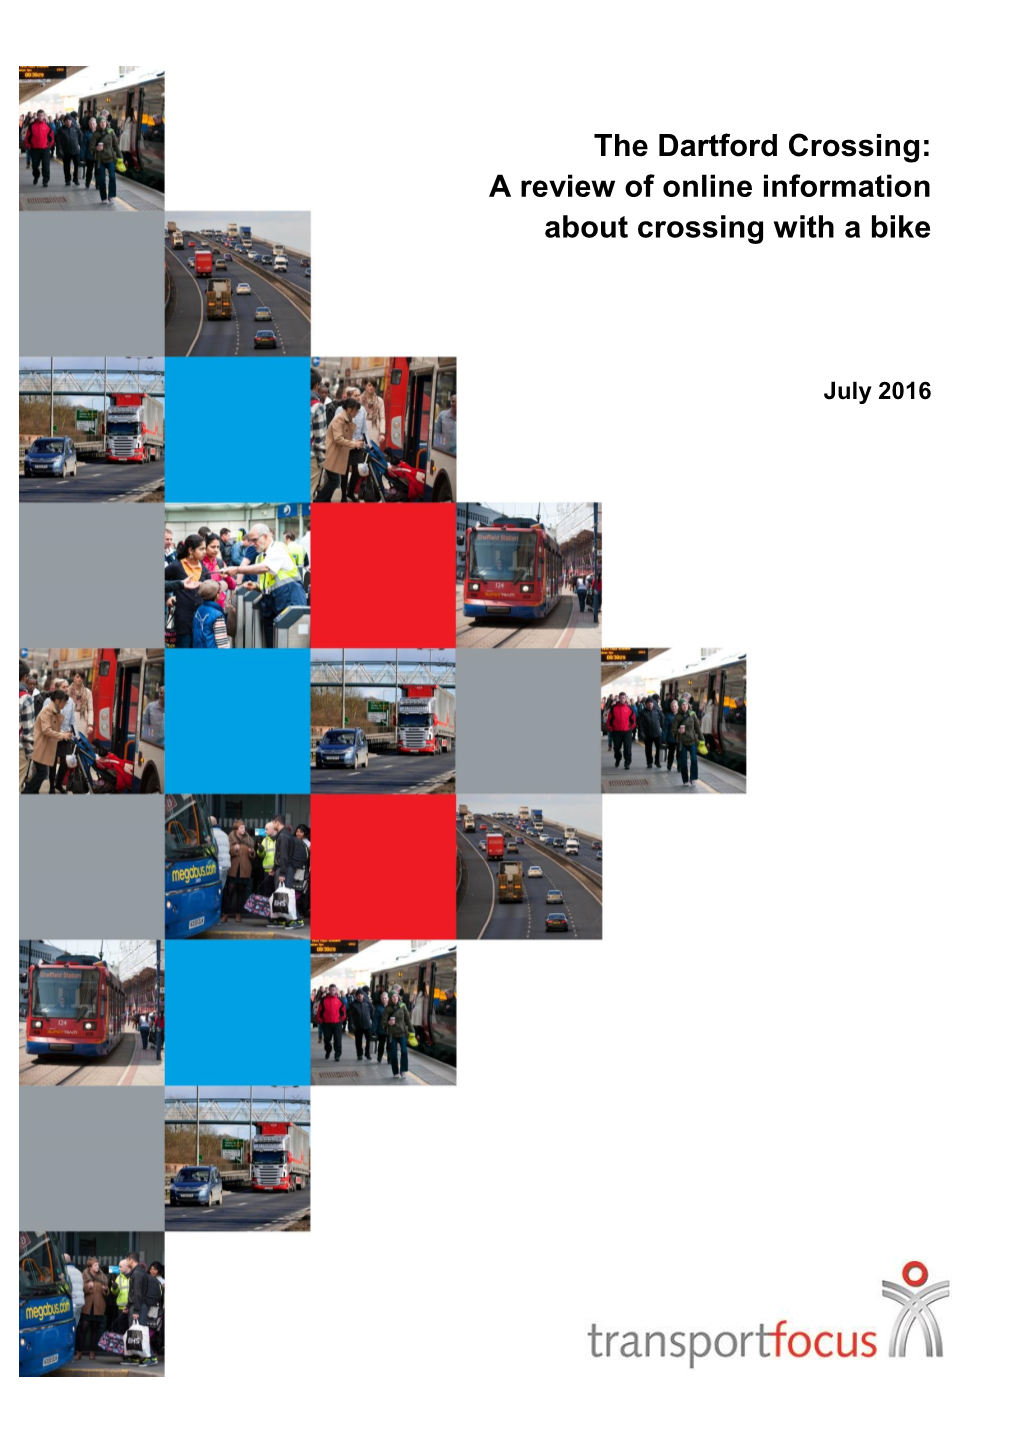 The Dartford Crossing: a Review of Online Information About Crossing with a Bike